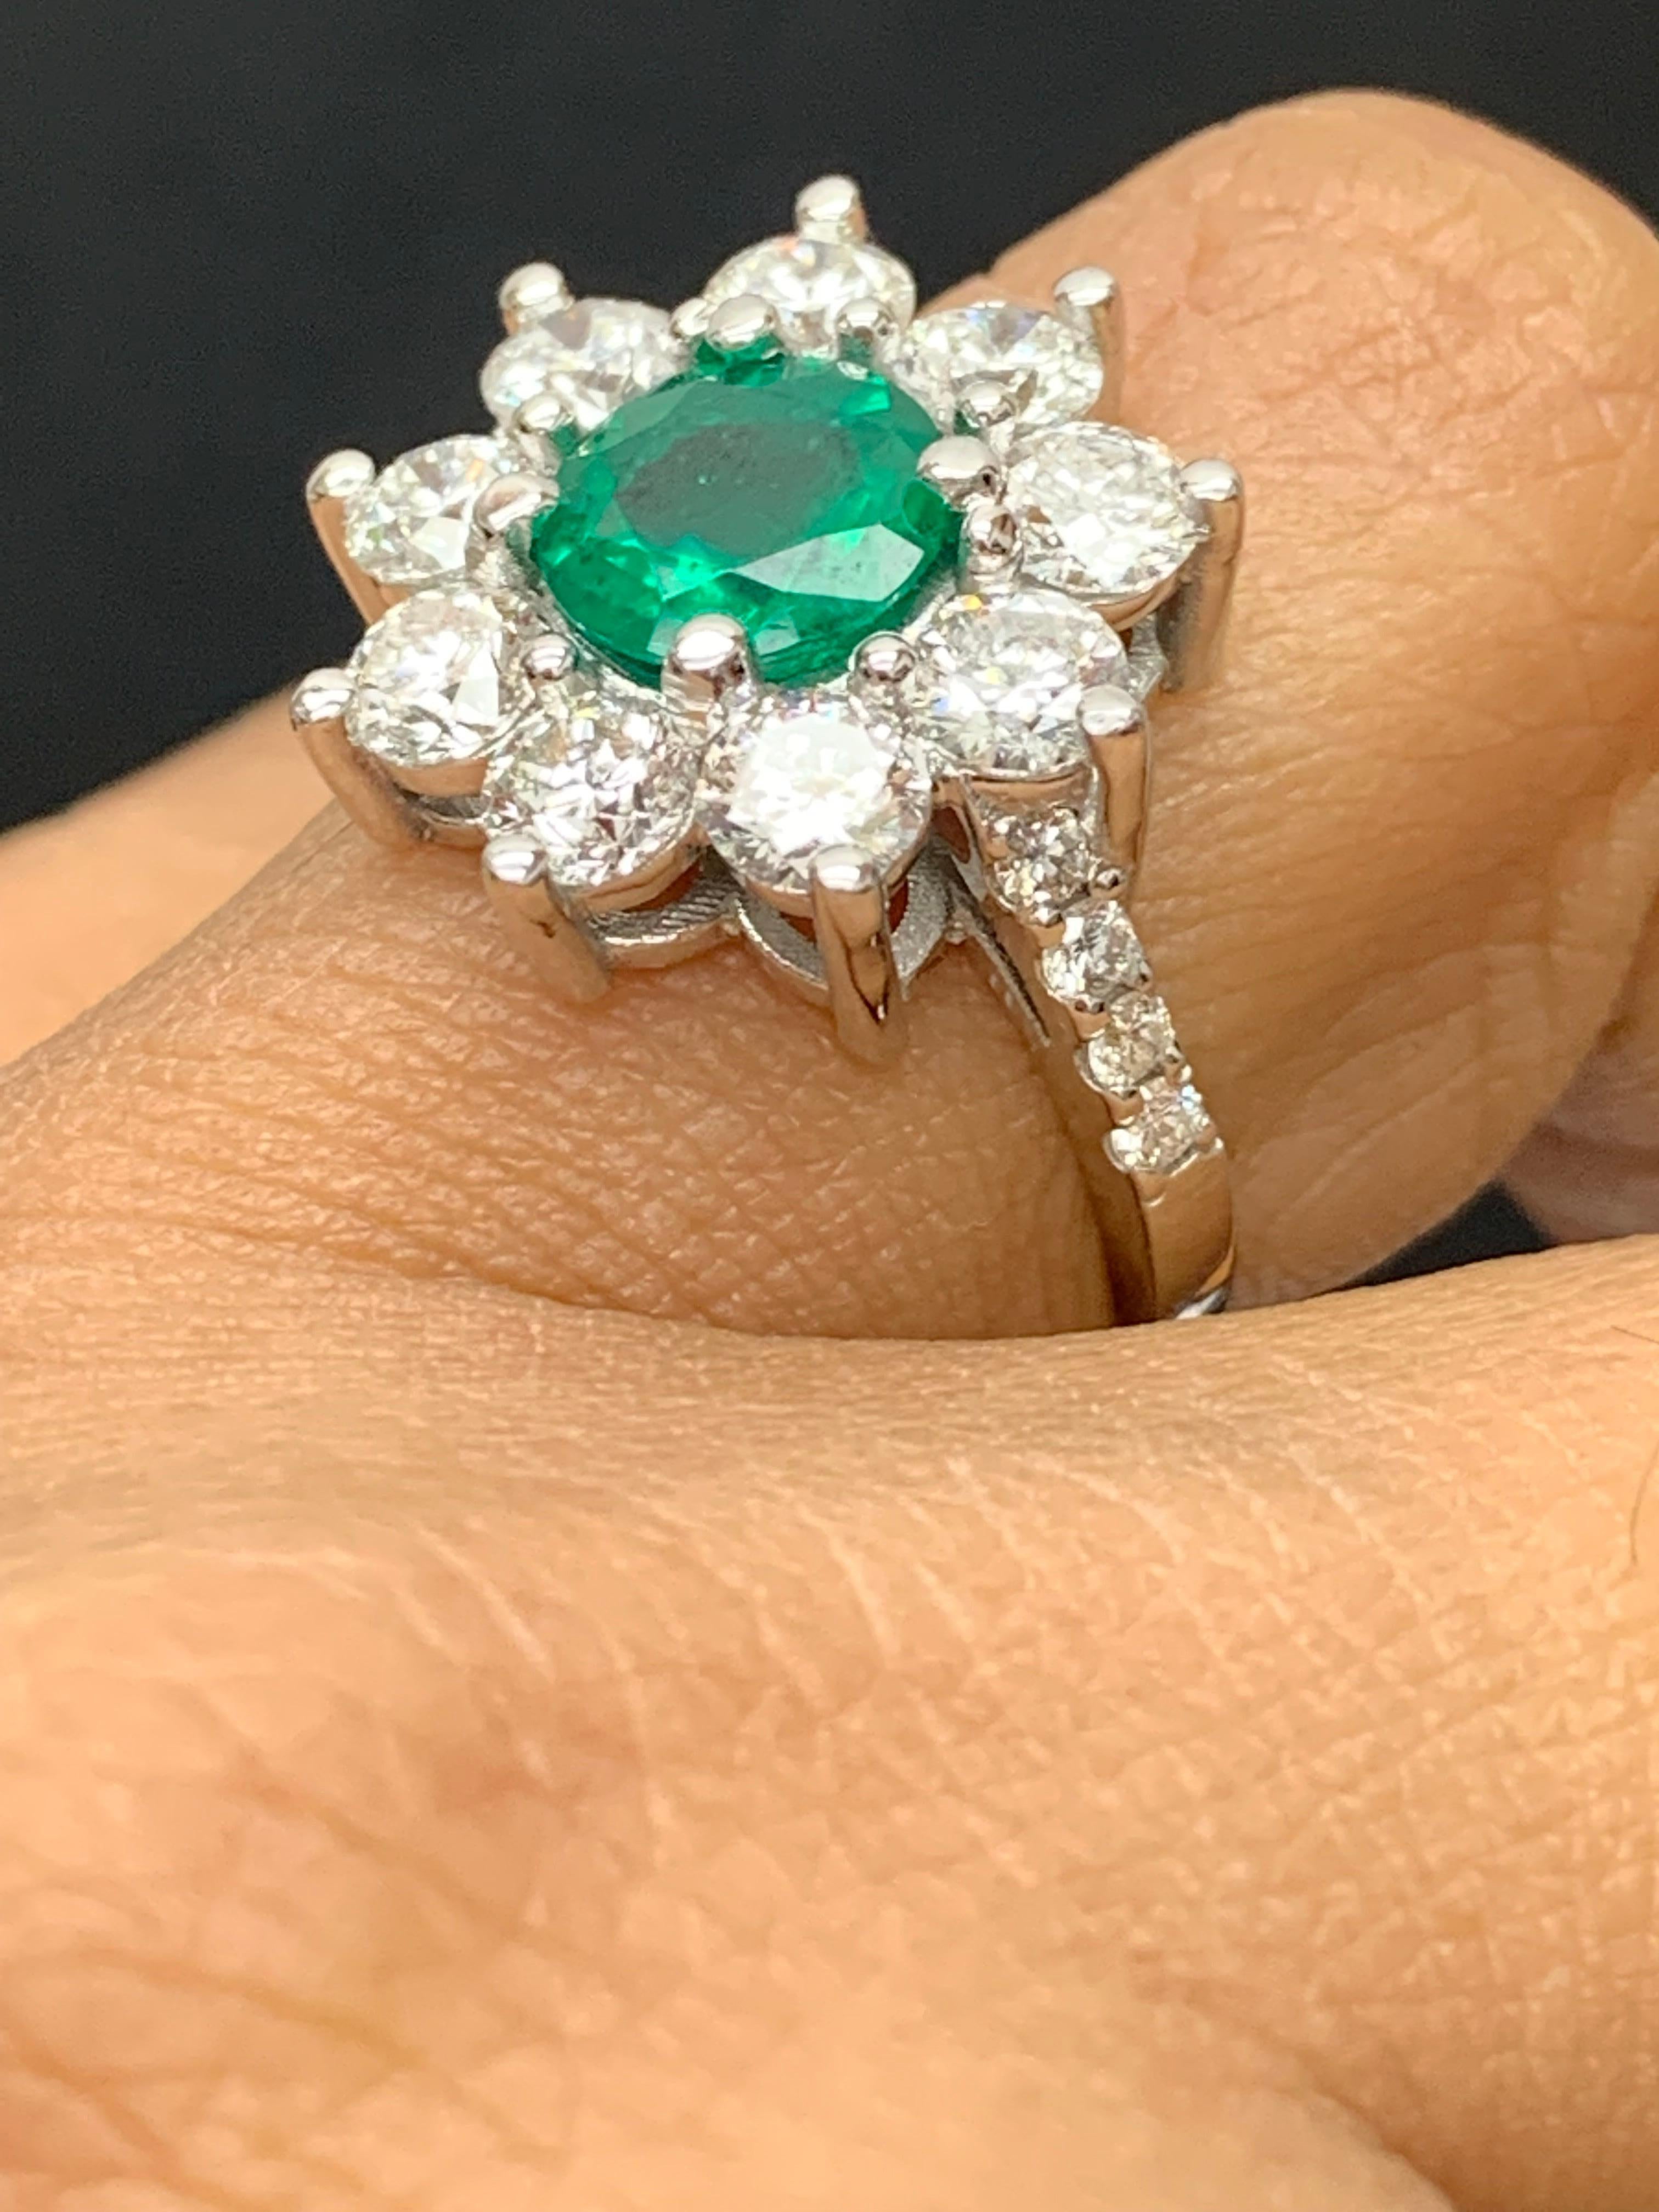 1.18 Carat Brilliant Cut Emerald and Diamond Ring in 14K White Gold For Sale 4